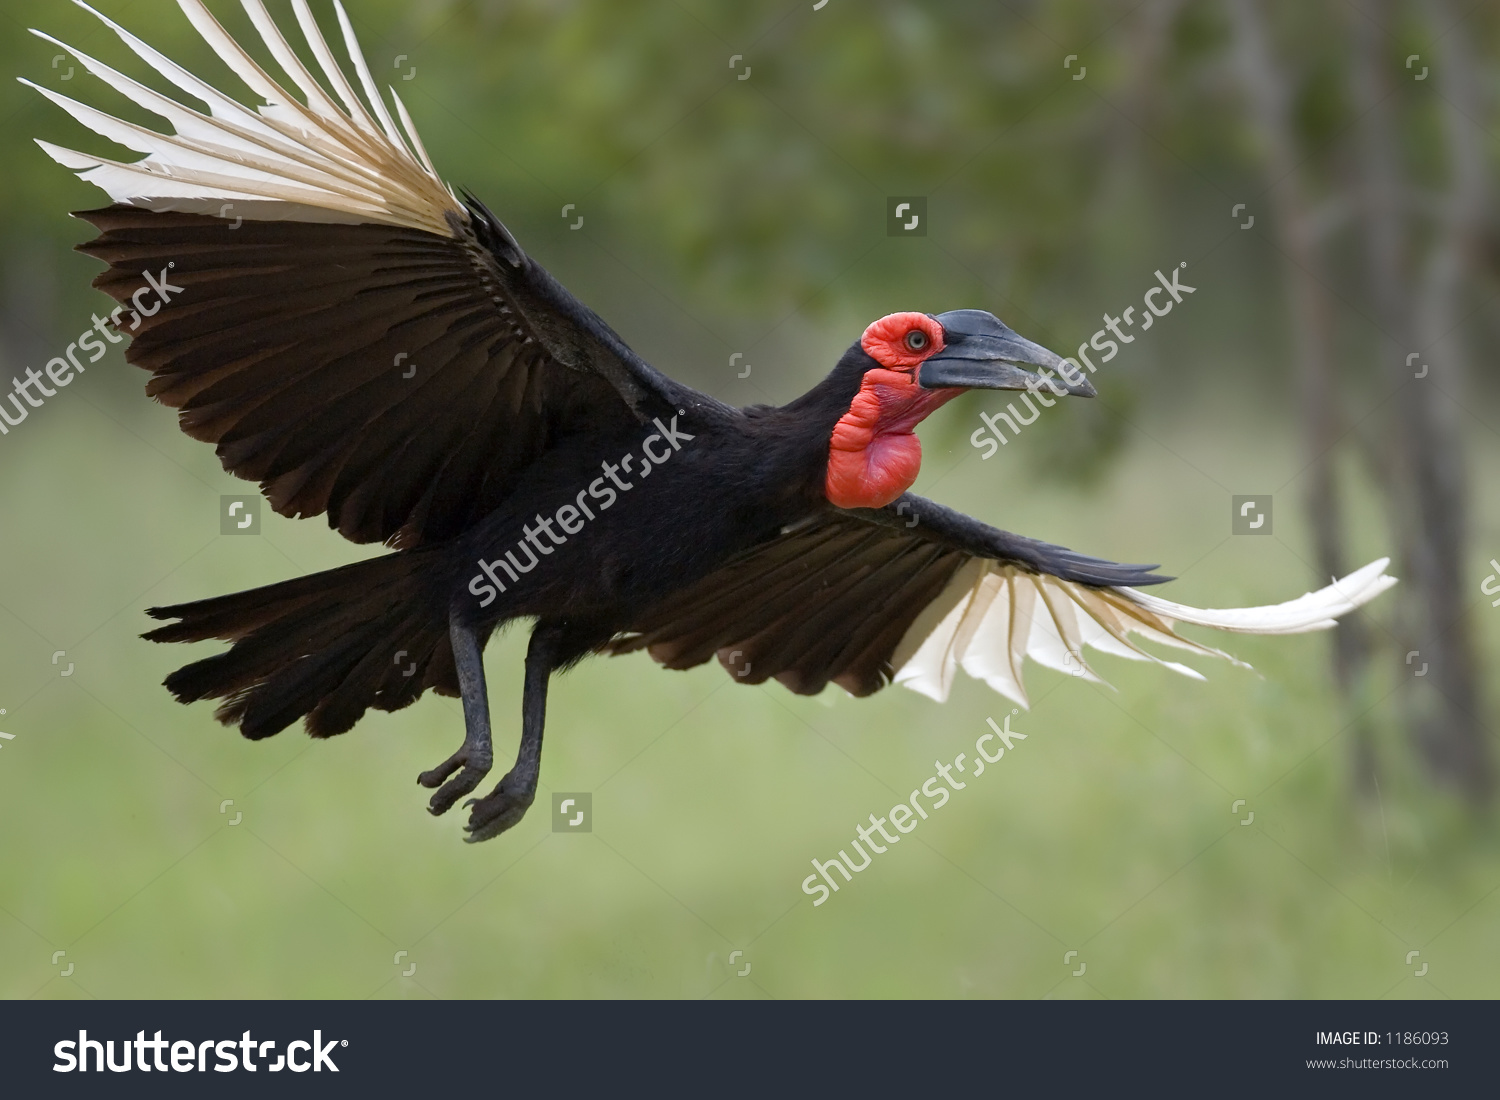 Southern Ground Hornbill clipart #9, Download drawings